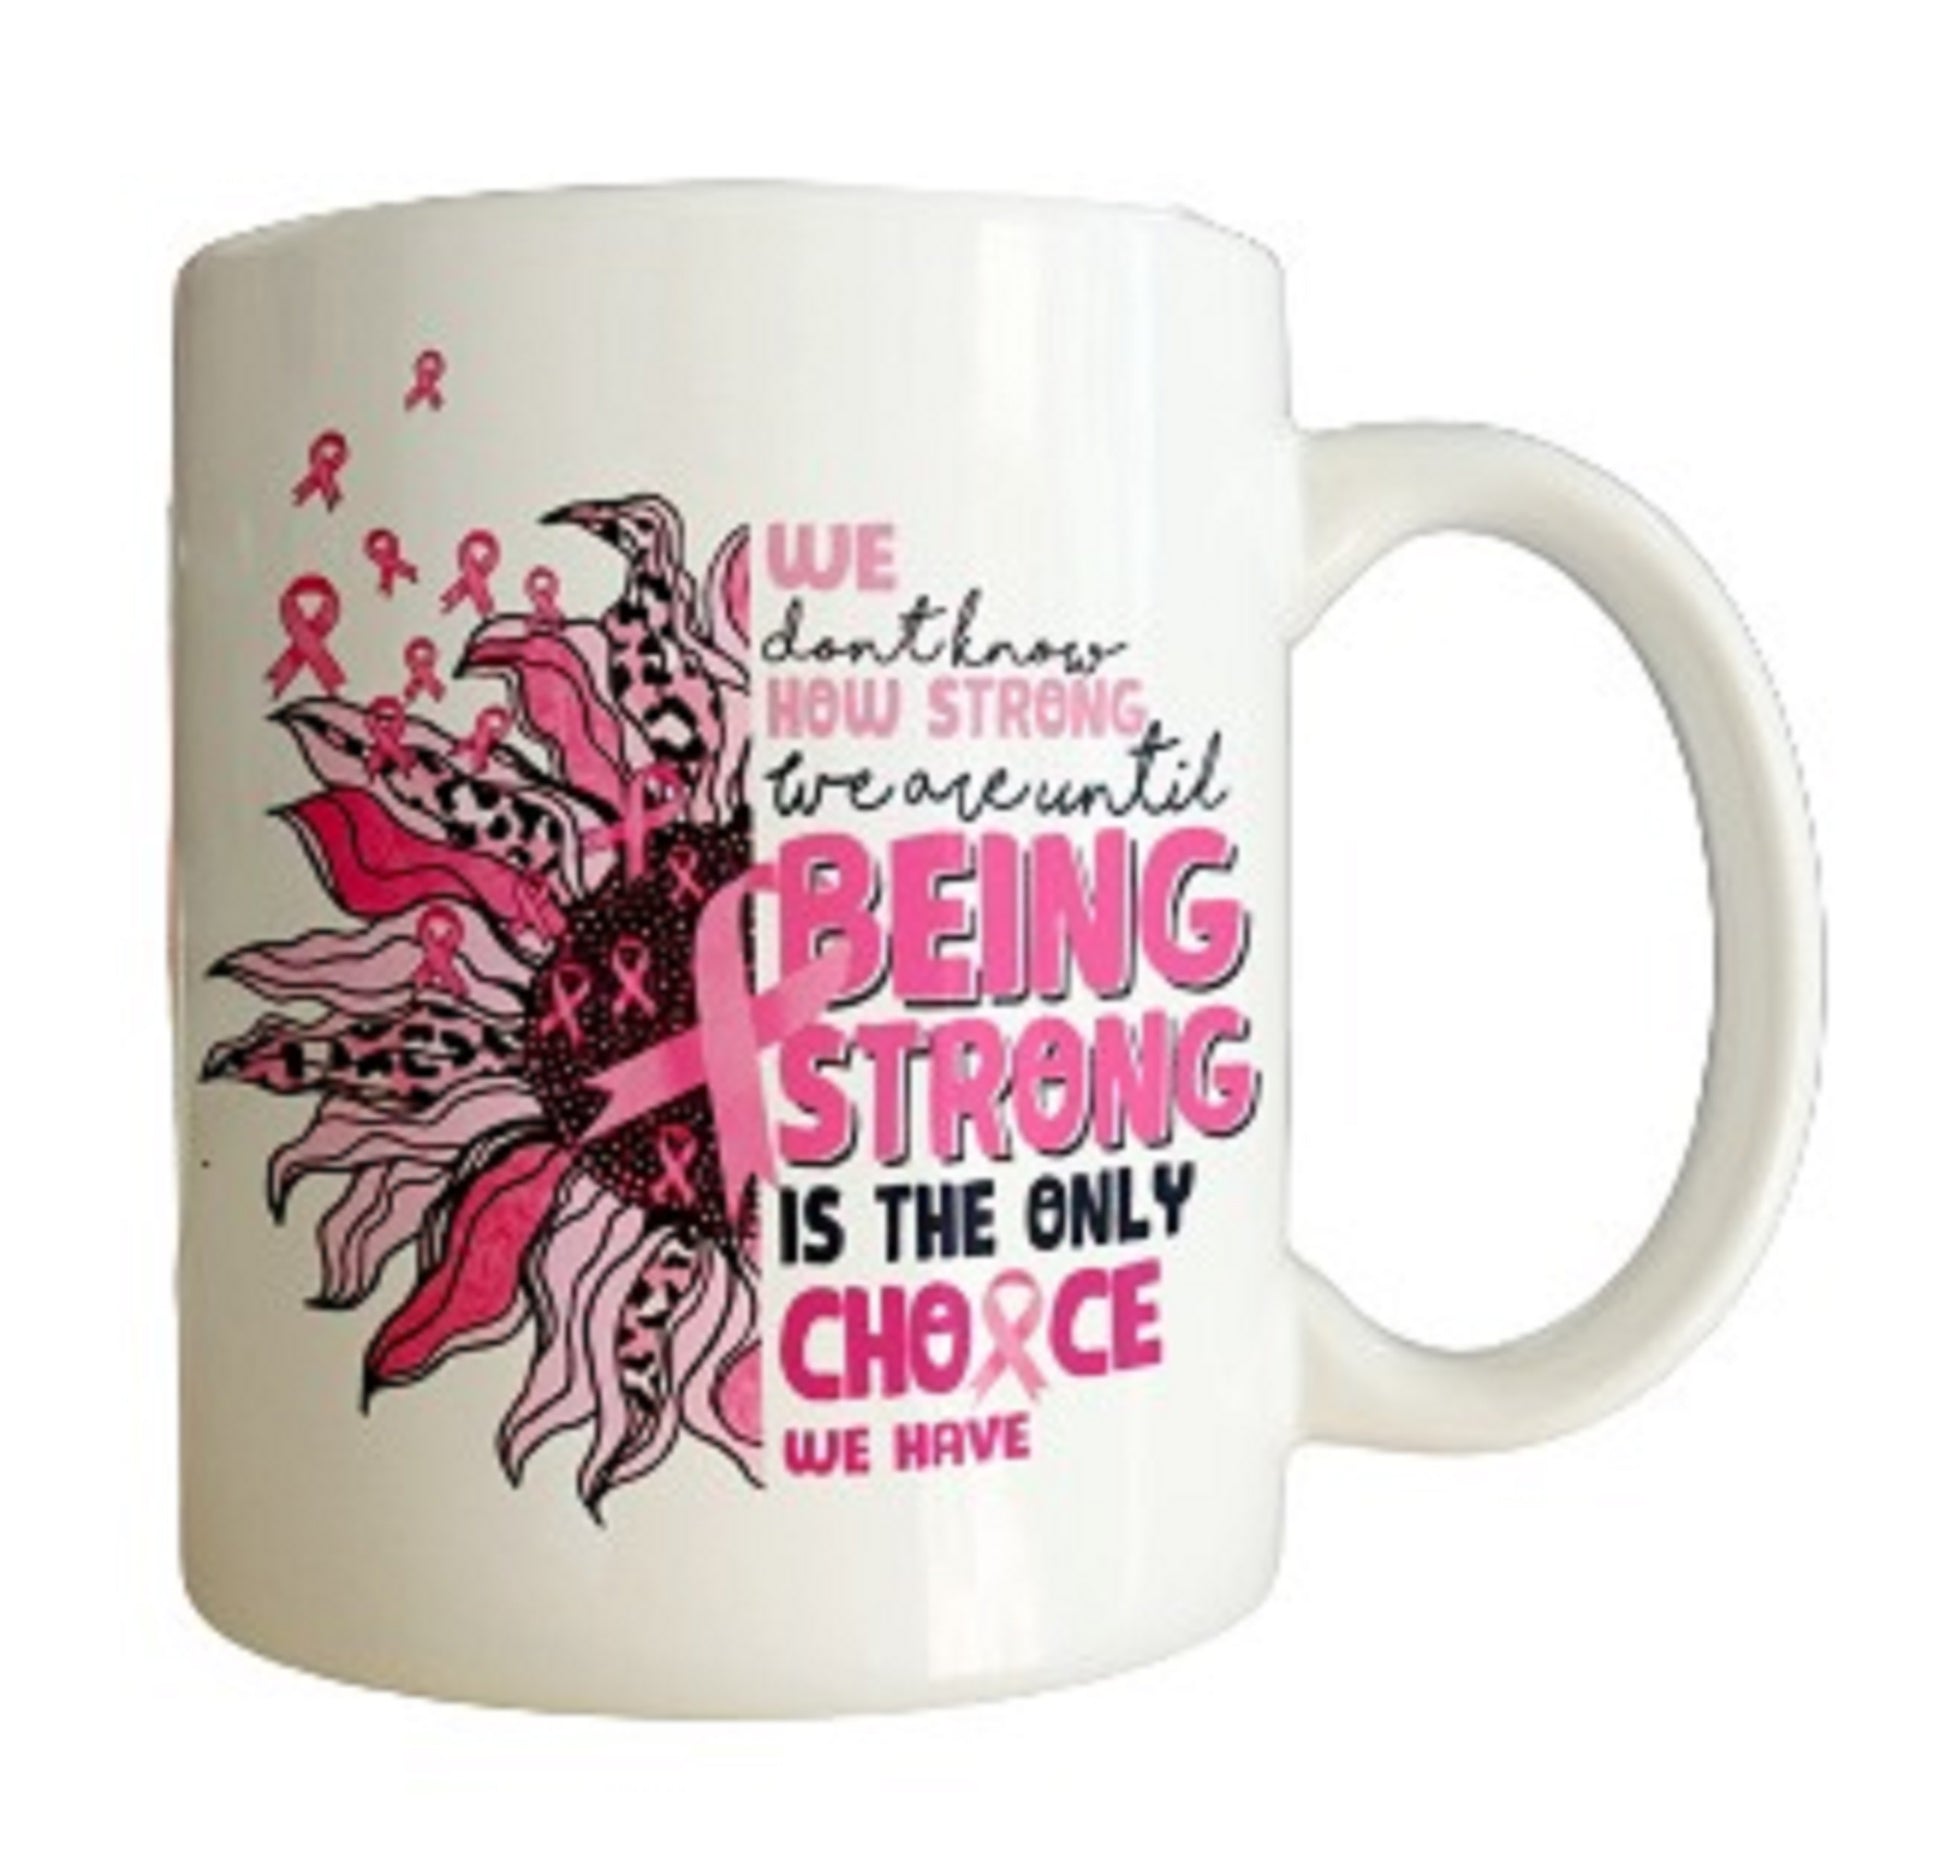  Breast Cancer We Are Strong Mug by Free Spirit Accessories sold by Free Spirit Accessories